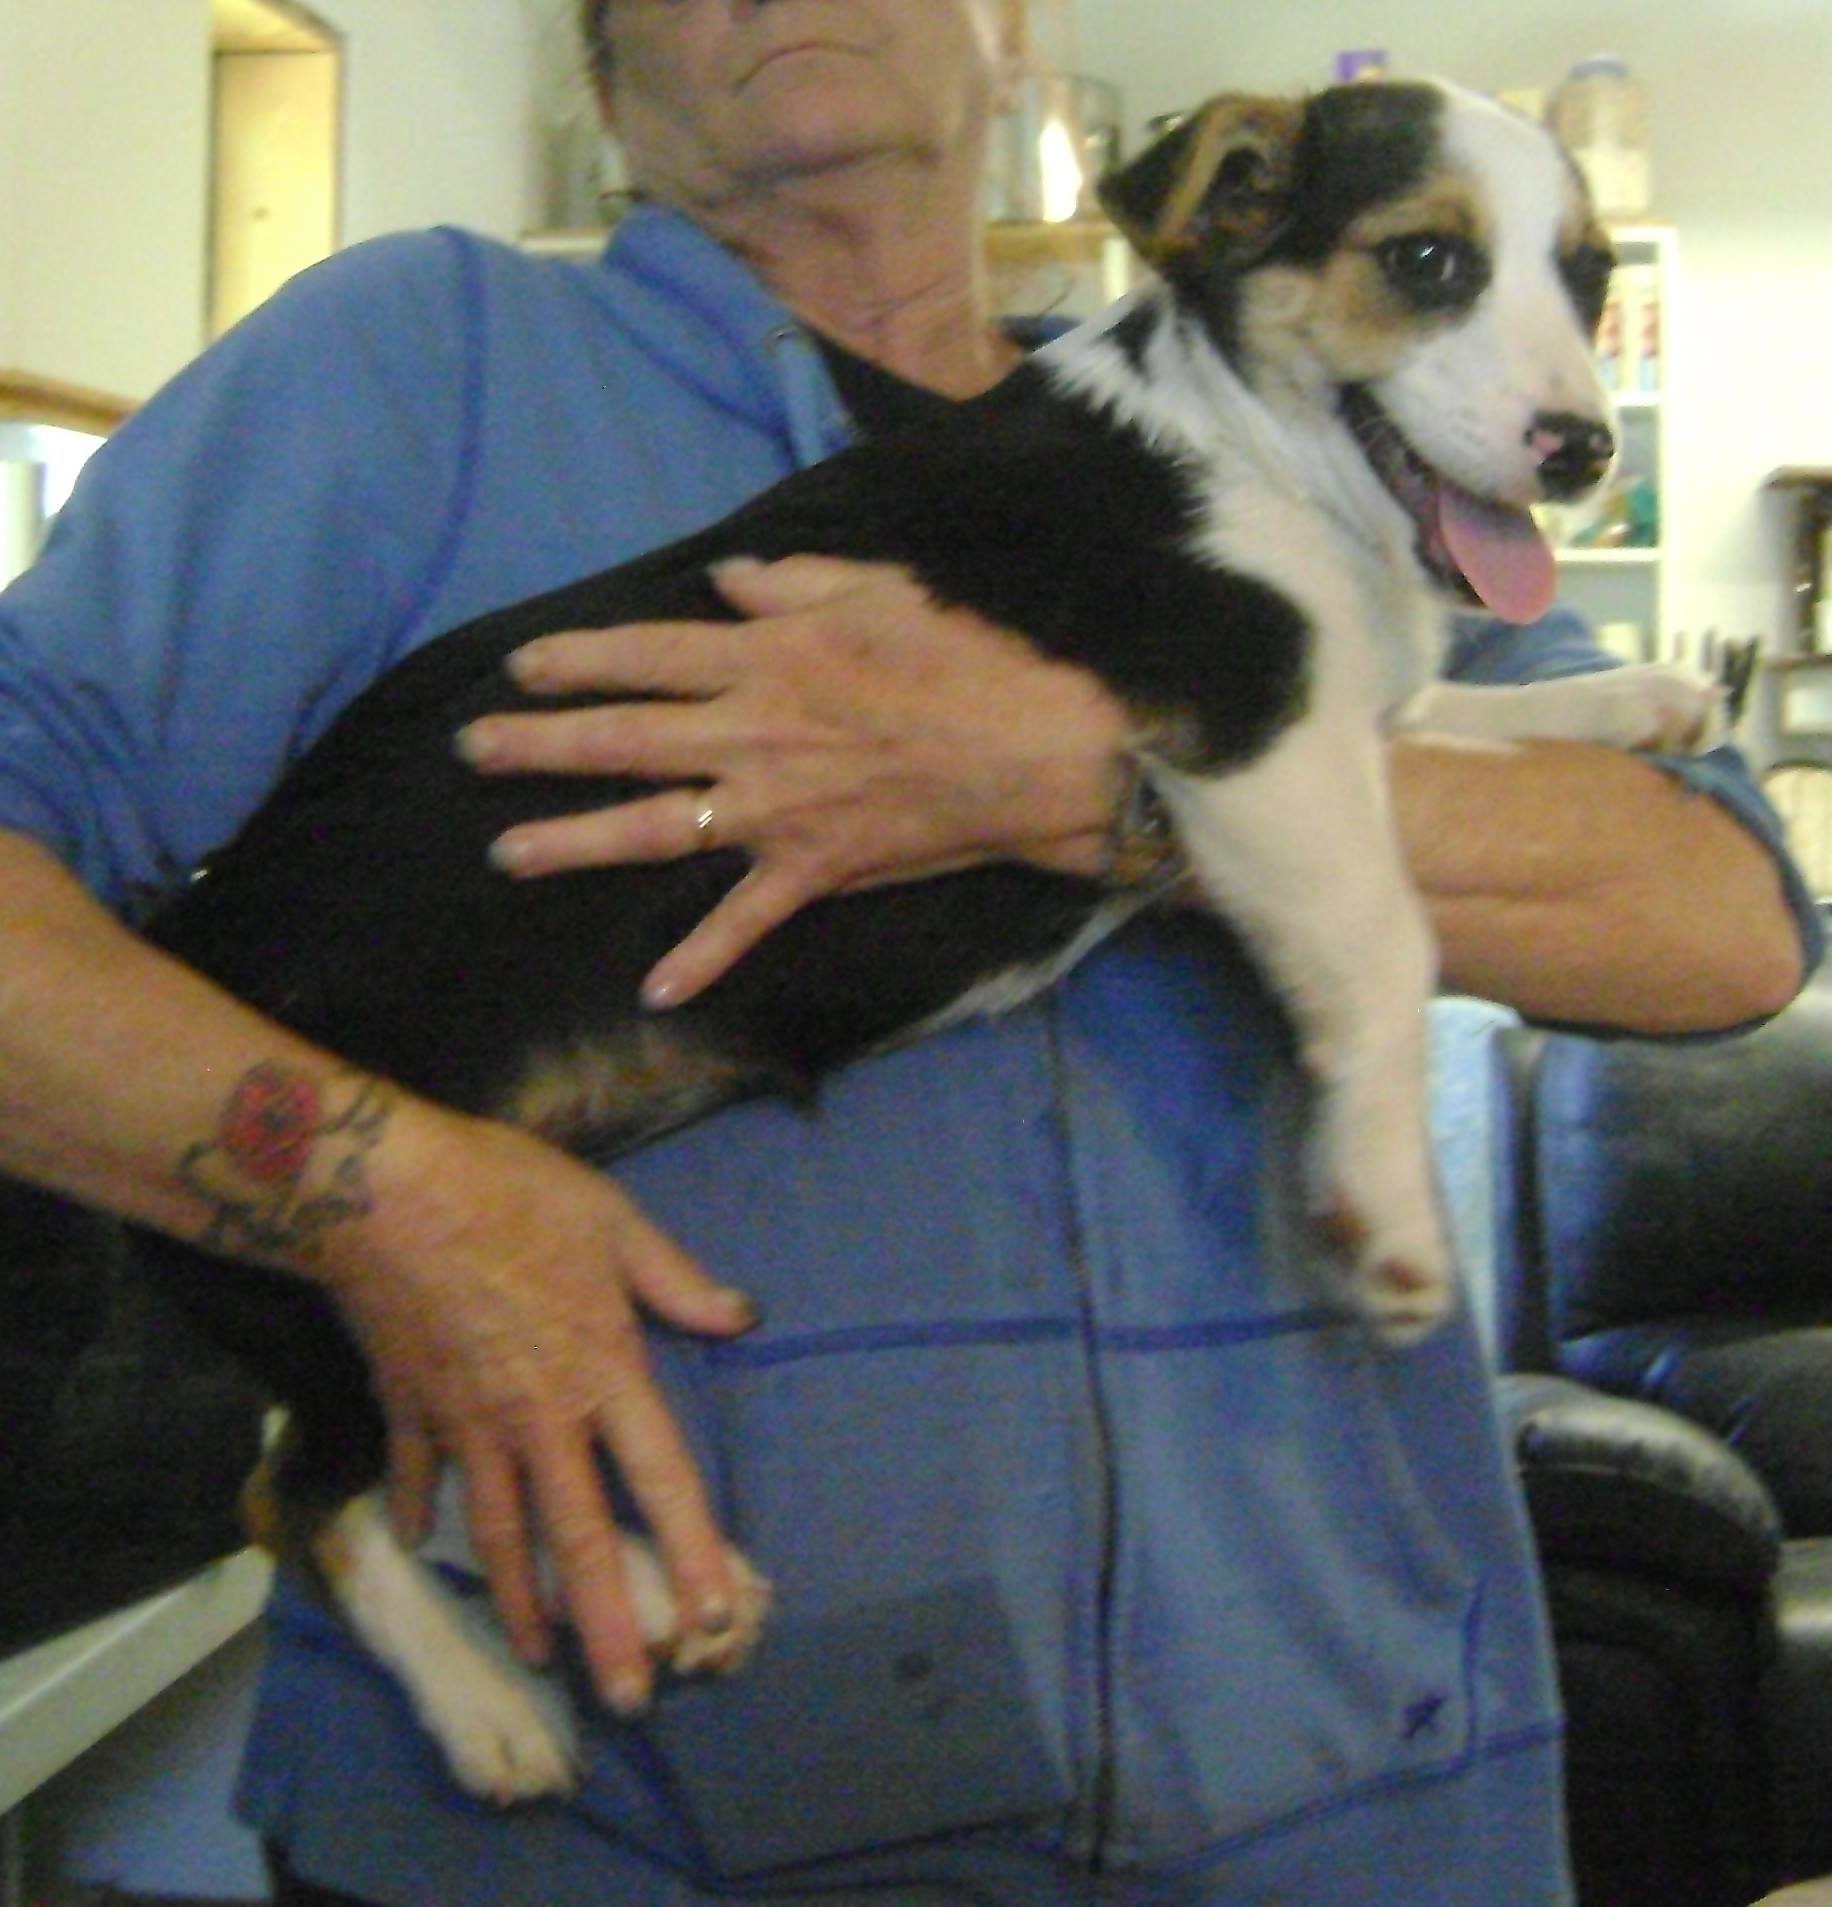 Bagel is a male Jack Russell- looking pup.